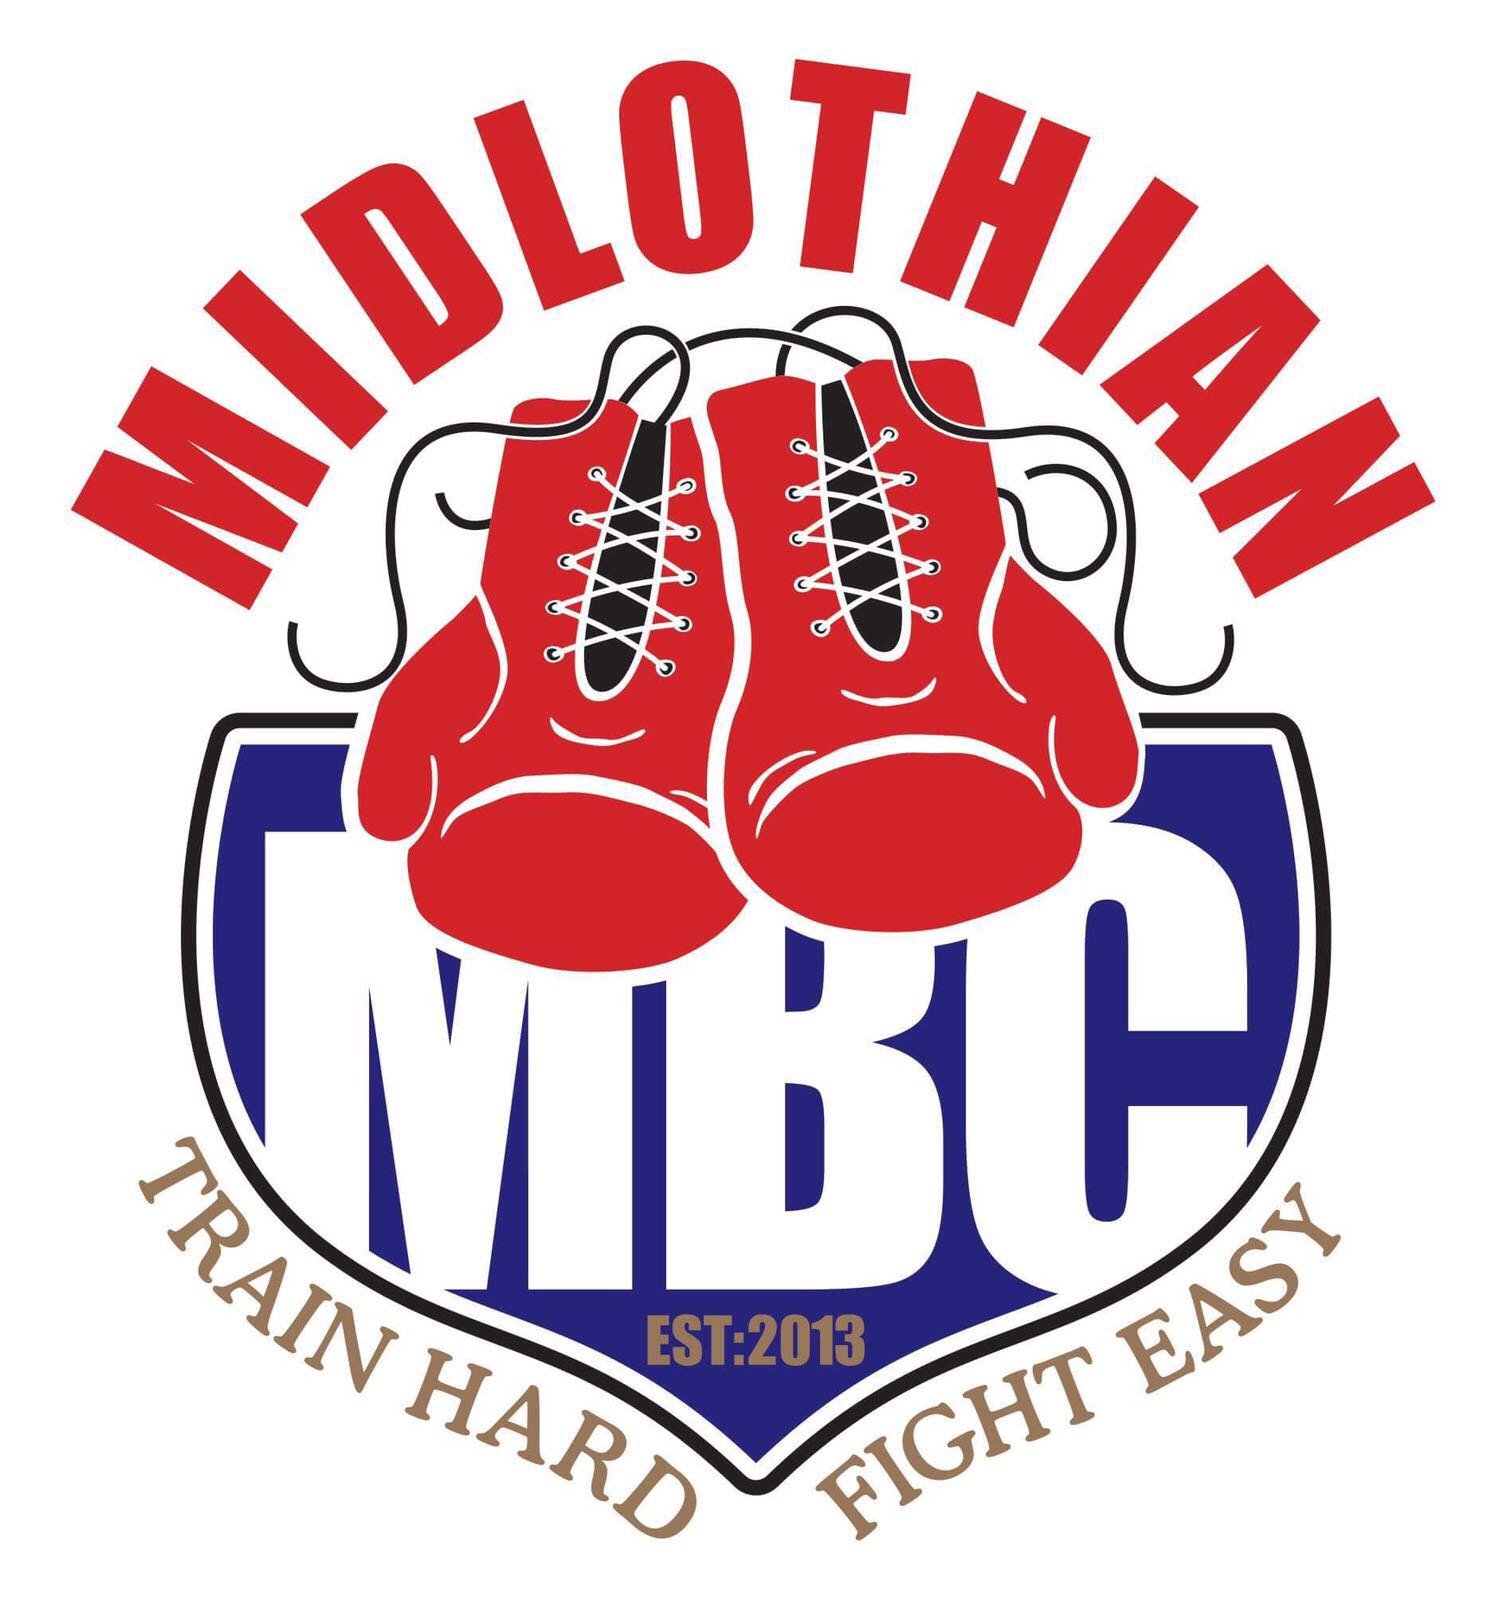 Midlothian Boxing Club (Boxing Scotland affiliated). Boxing Mon, Wed & Sat. Fitness Classes Tues, Thurs, Sat and Sunday. See our timetable for times